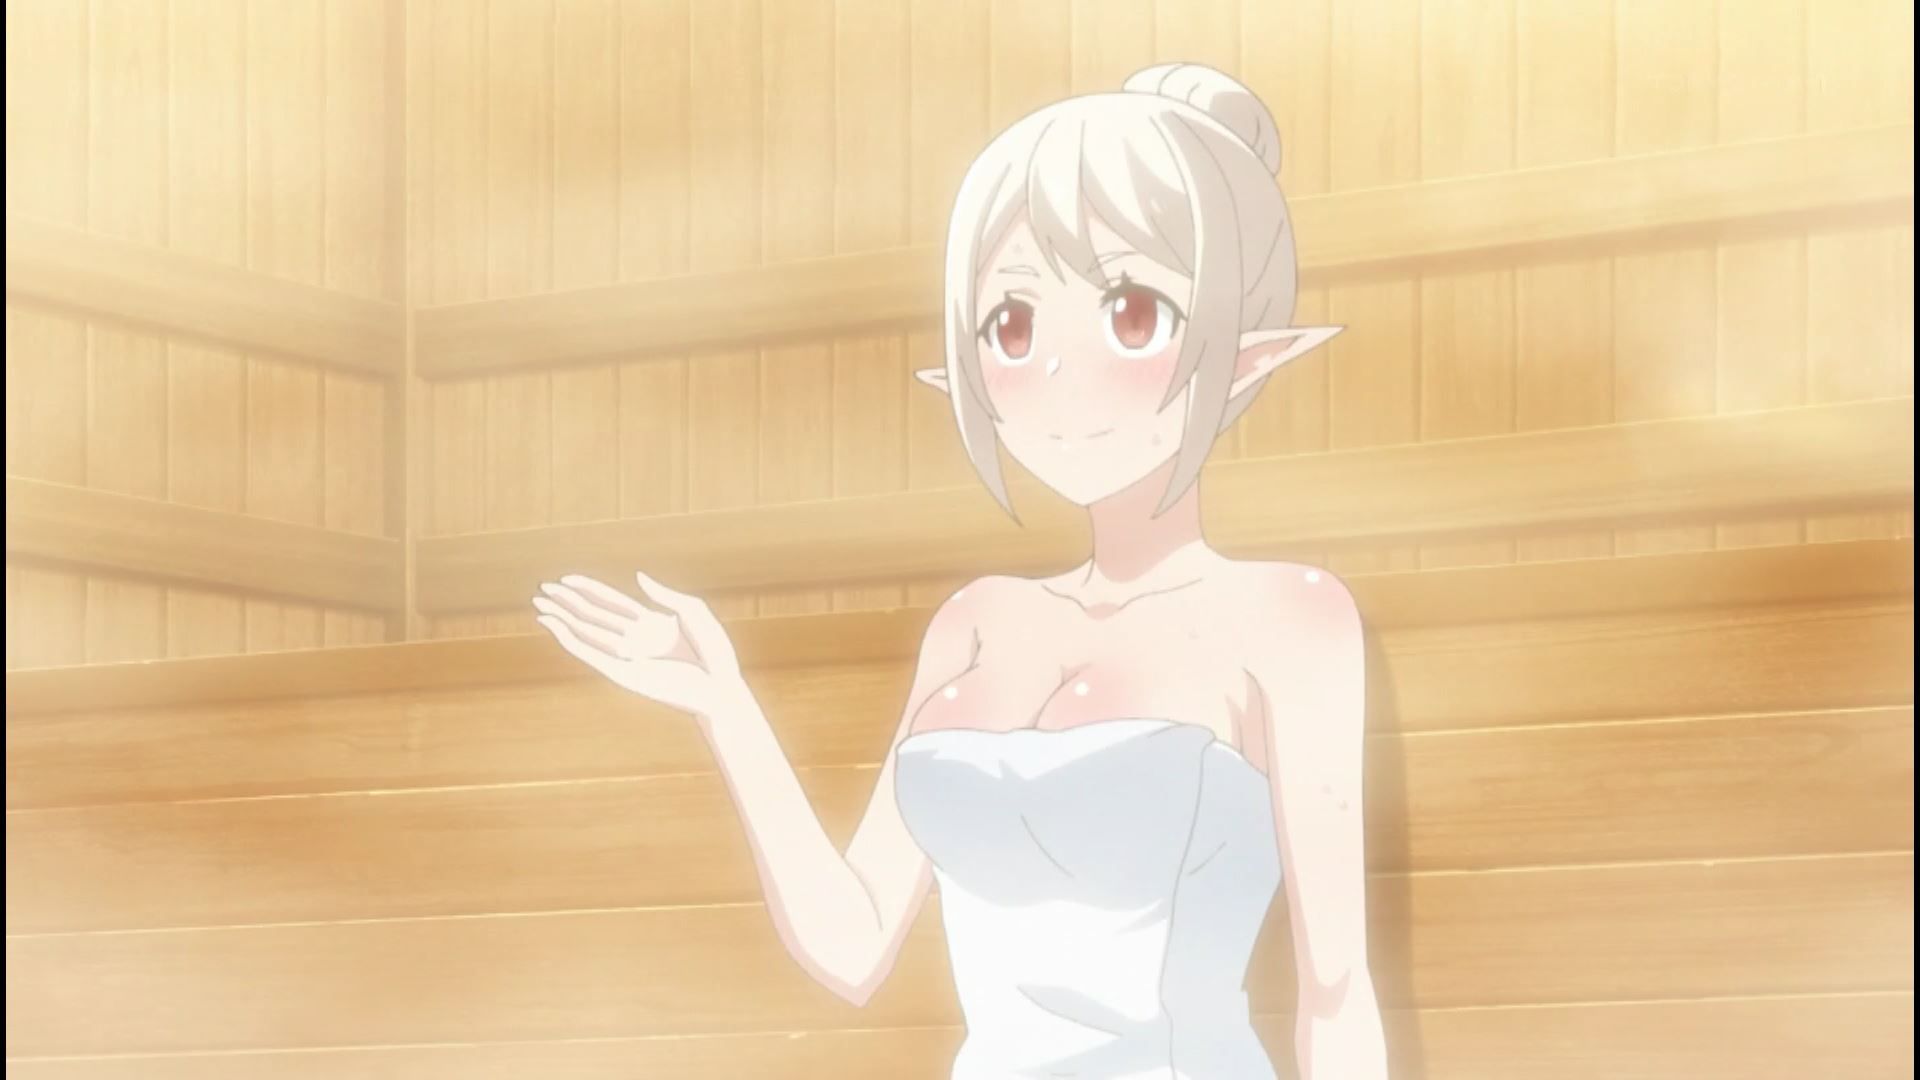 In episode 4 of the anime "True Companion", there is an erotic scene where you enter the sauna naked with an erotic boob girl! 20